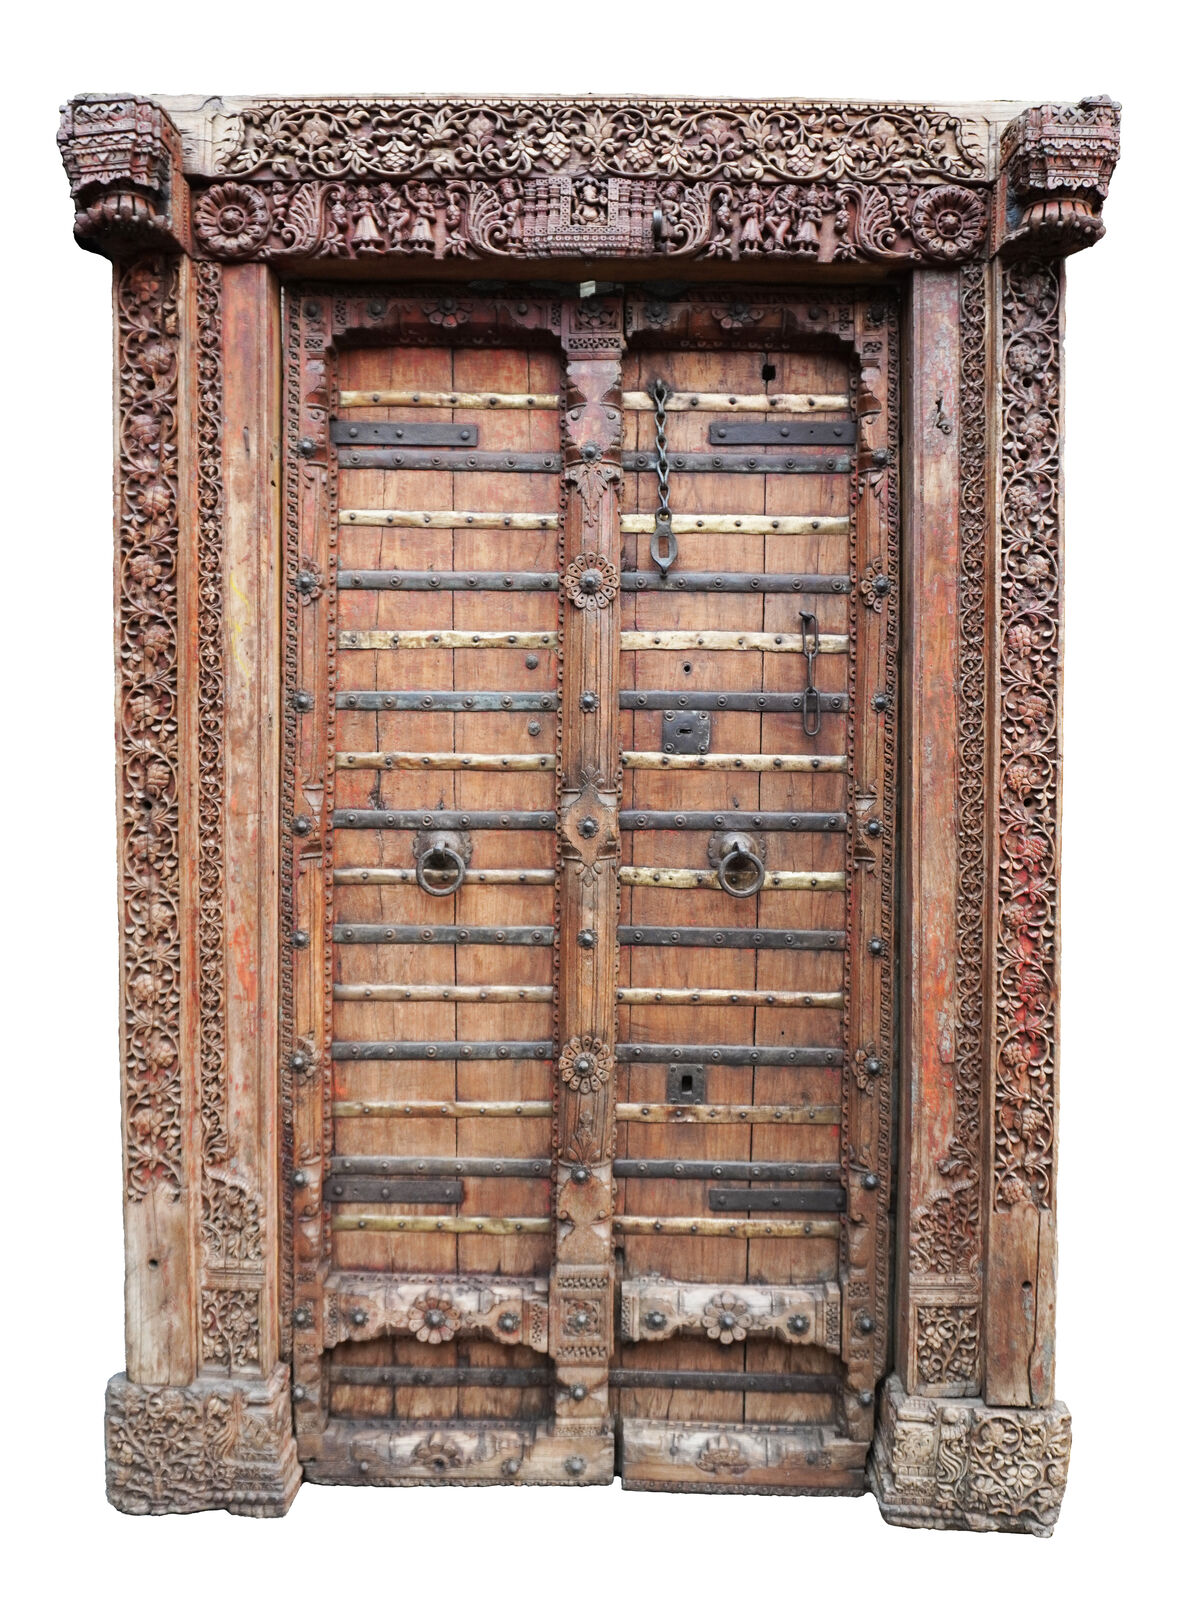 Door with scenes of Krishna guarded by Gopis, Hand-carved teak wood with metal applications, 18th Century, India, 222 x 150 x 20 cm. PHOTO CREDIT: Rodrigo Rivero Lake